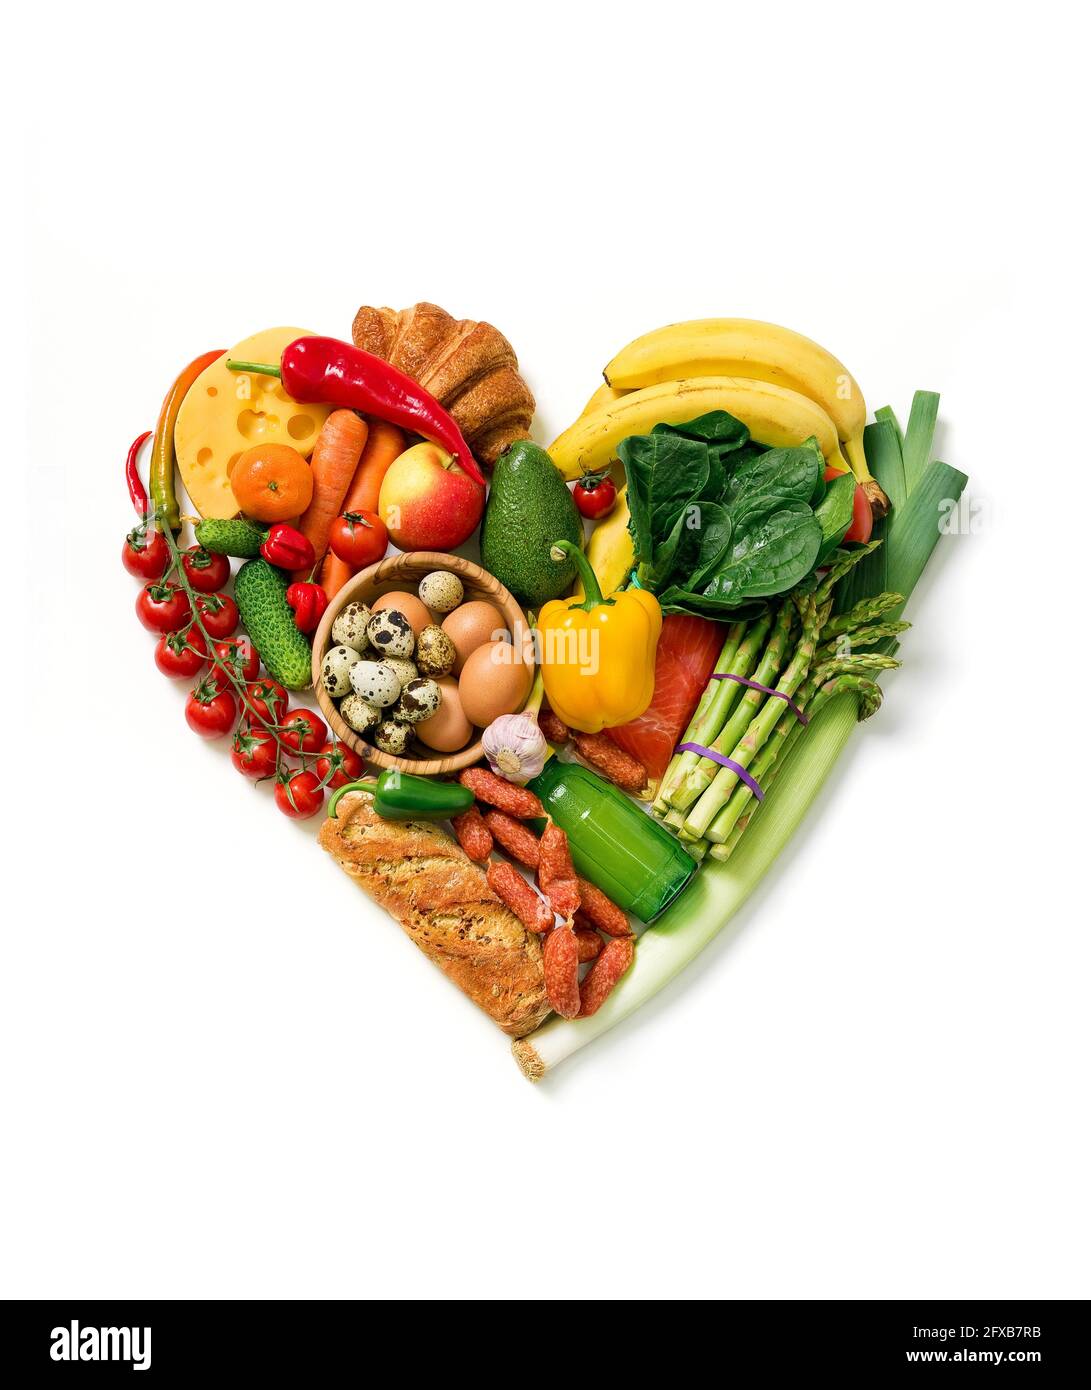 Heart symbol. Heart made from different fruits and vegetables. Top view. Stock Photo